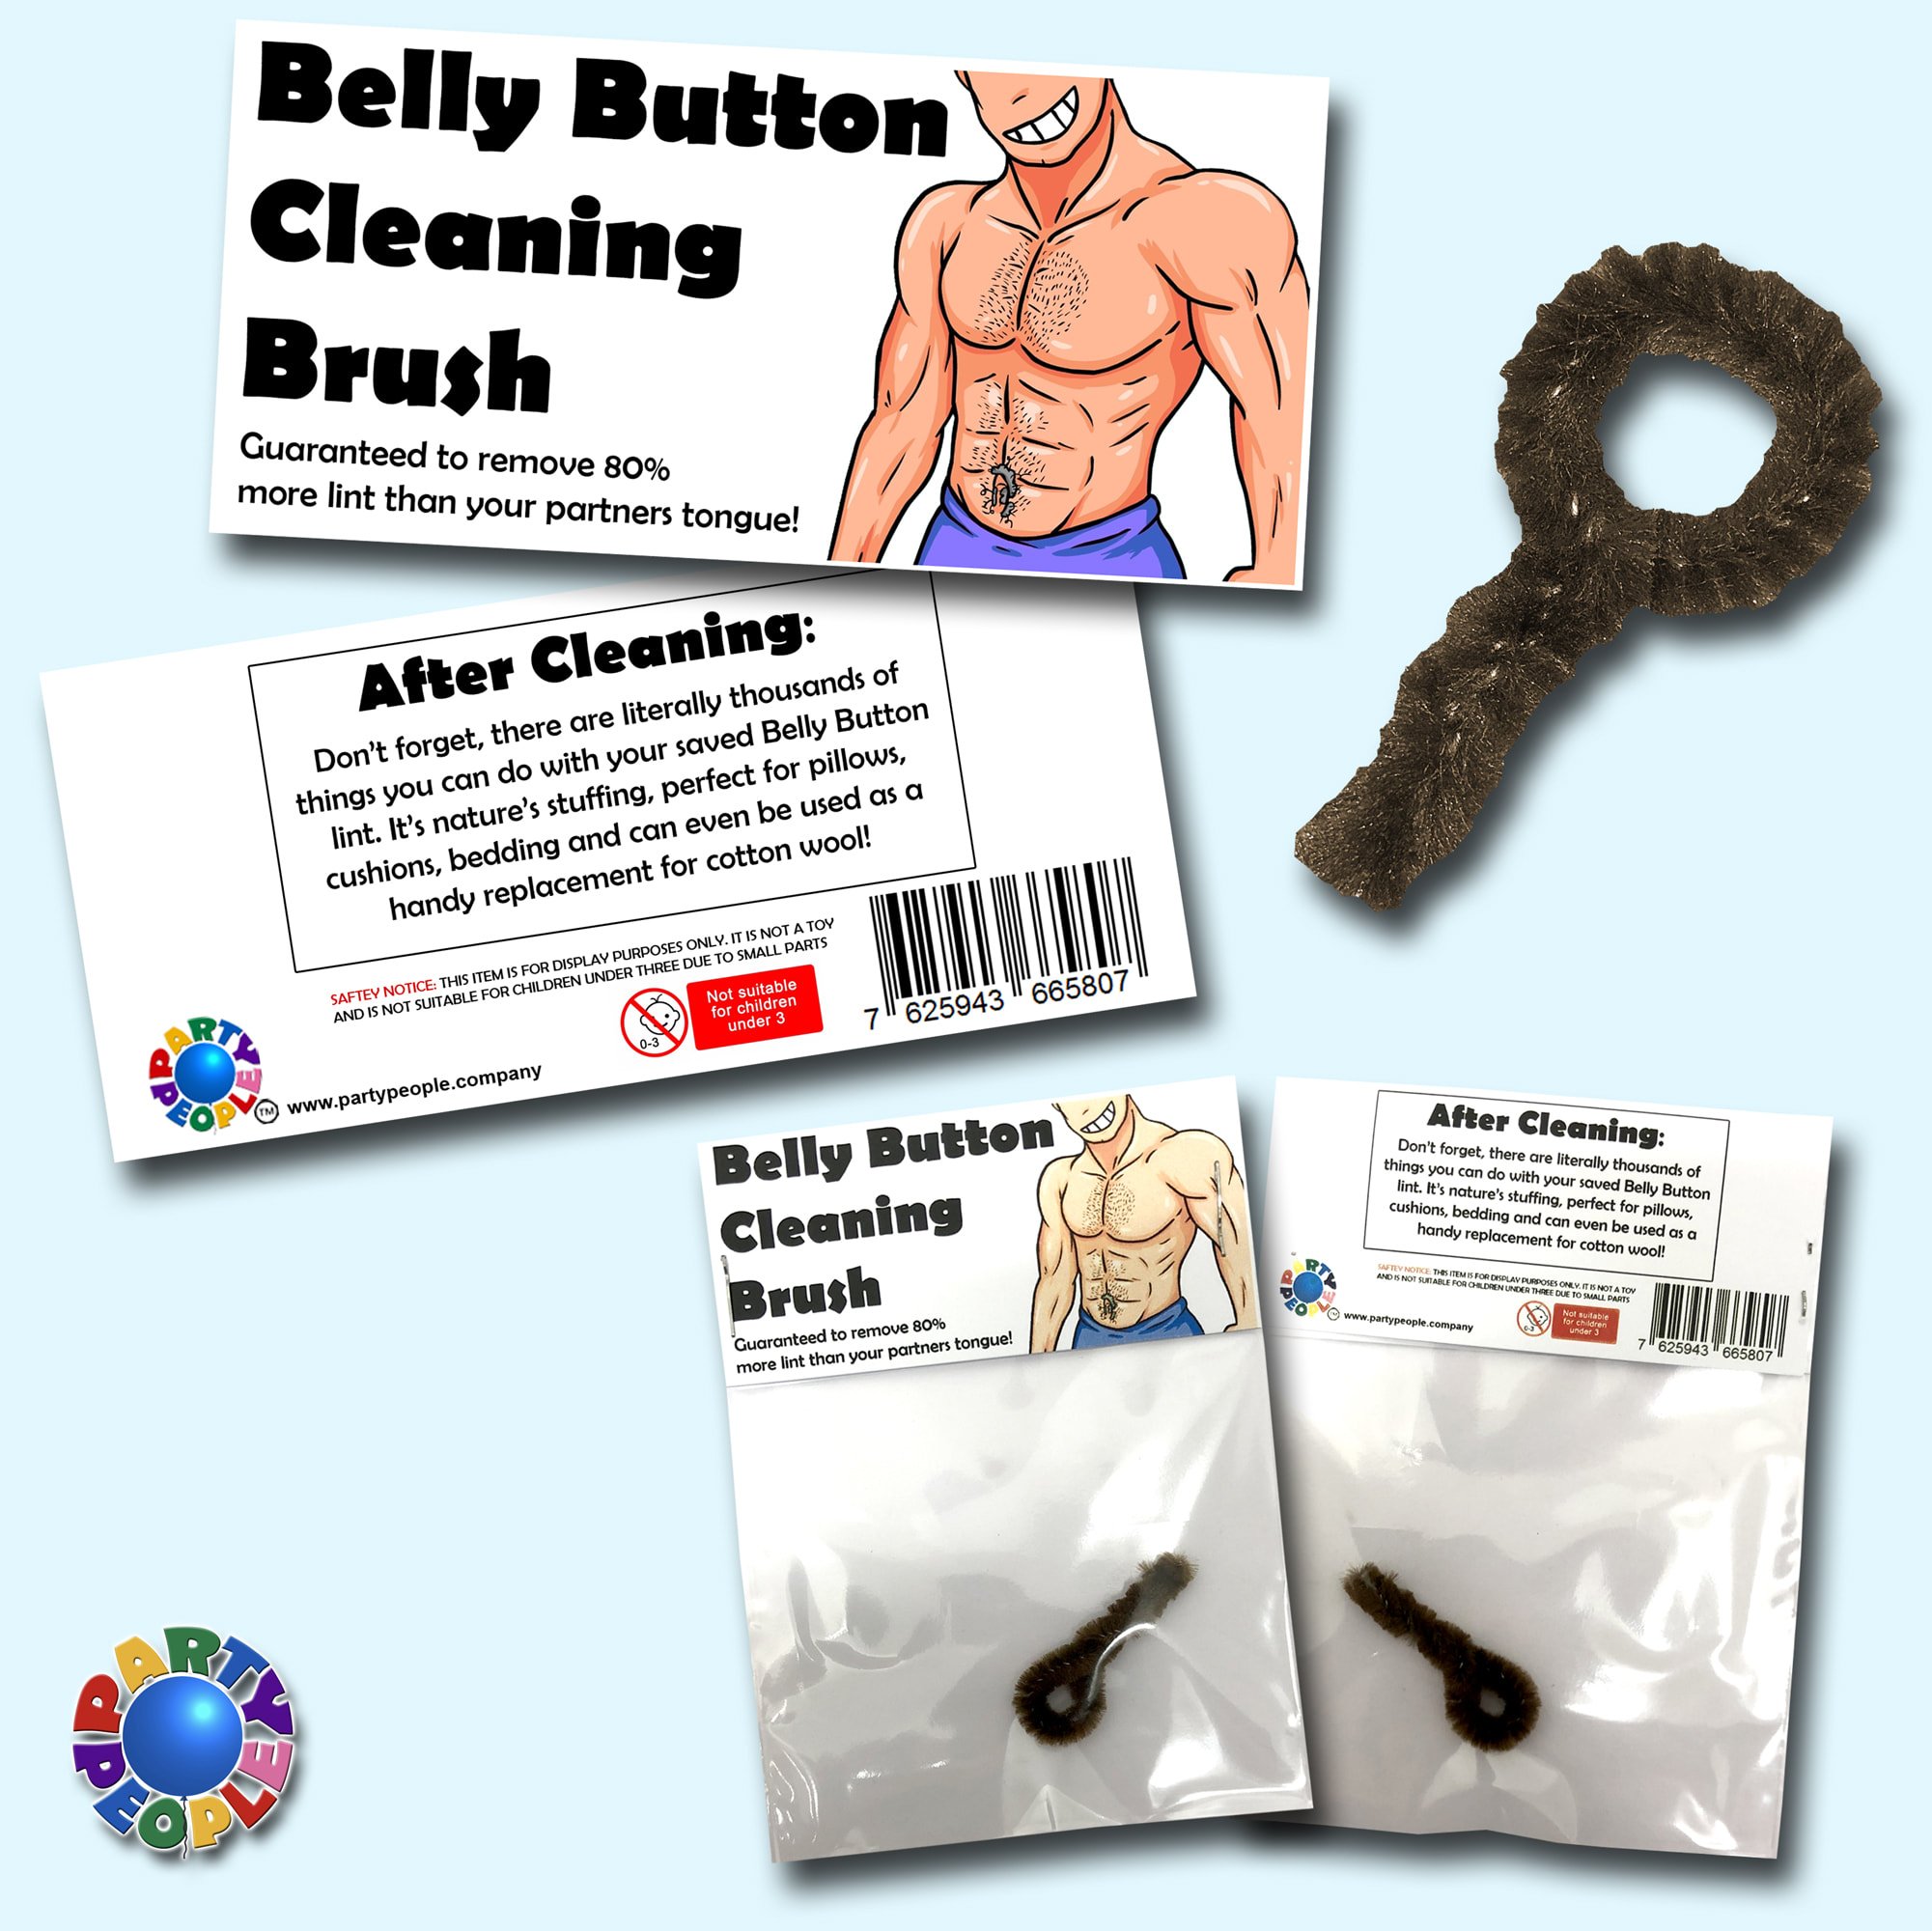 Belly Button Cleaning Brush